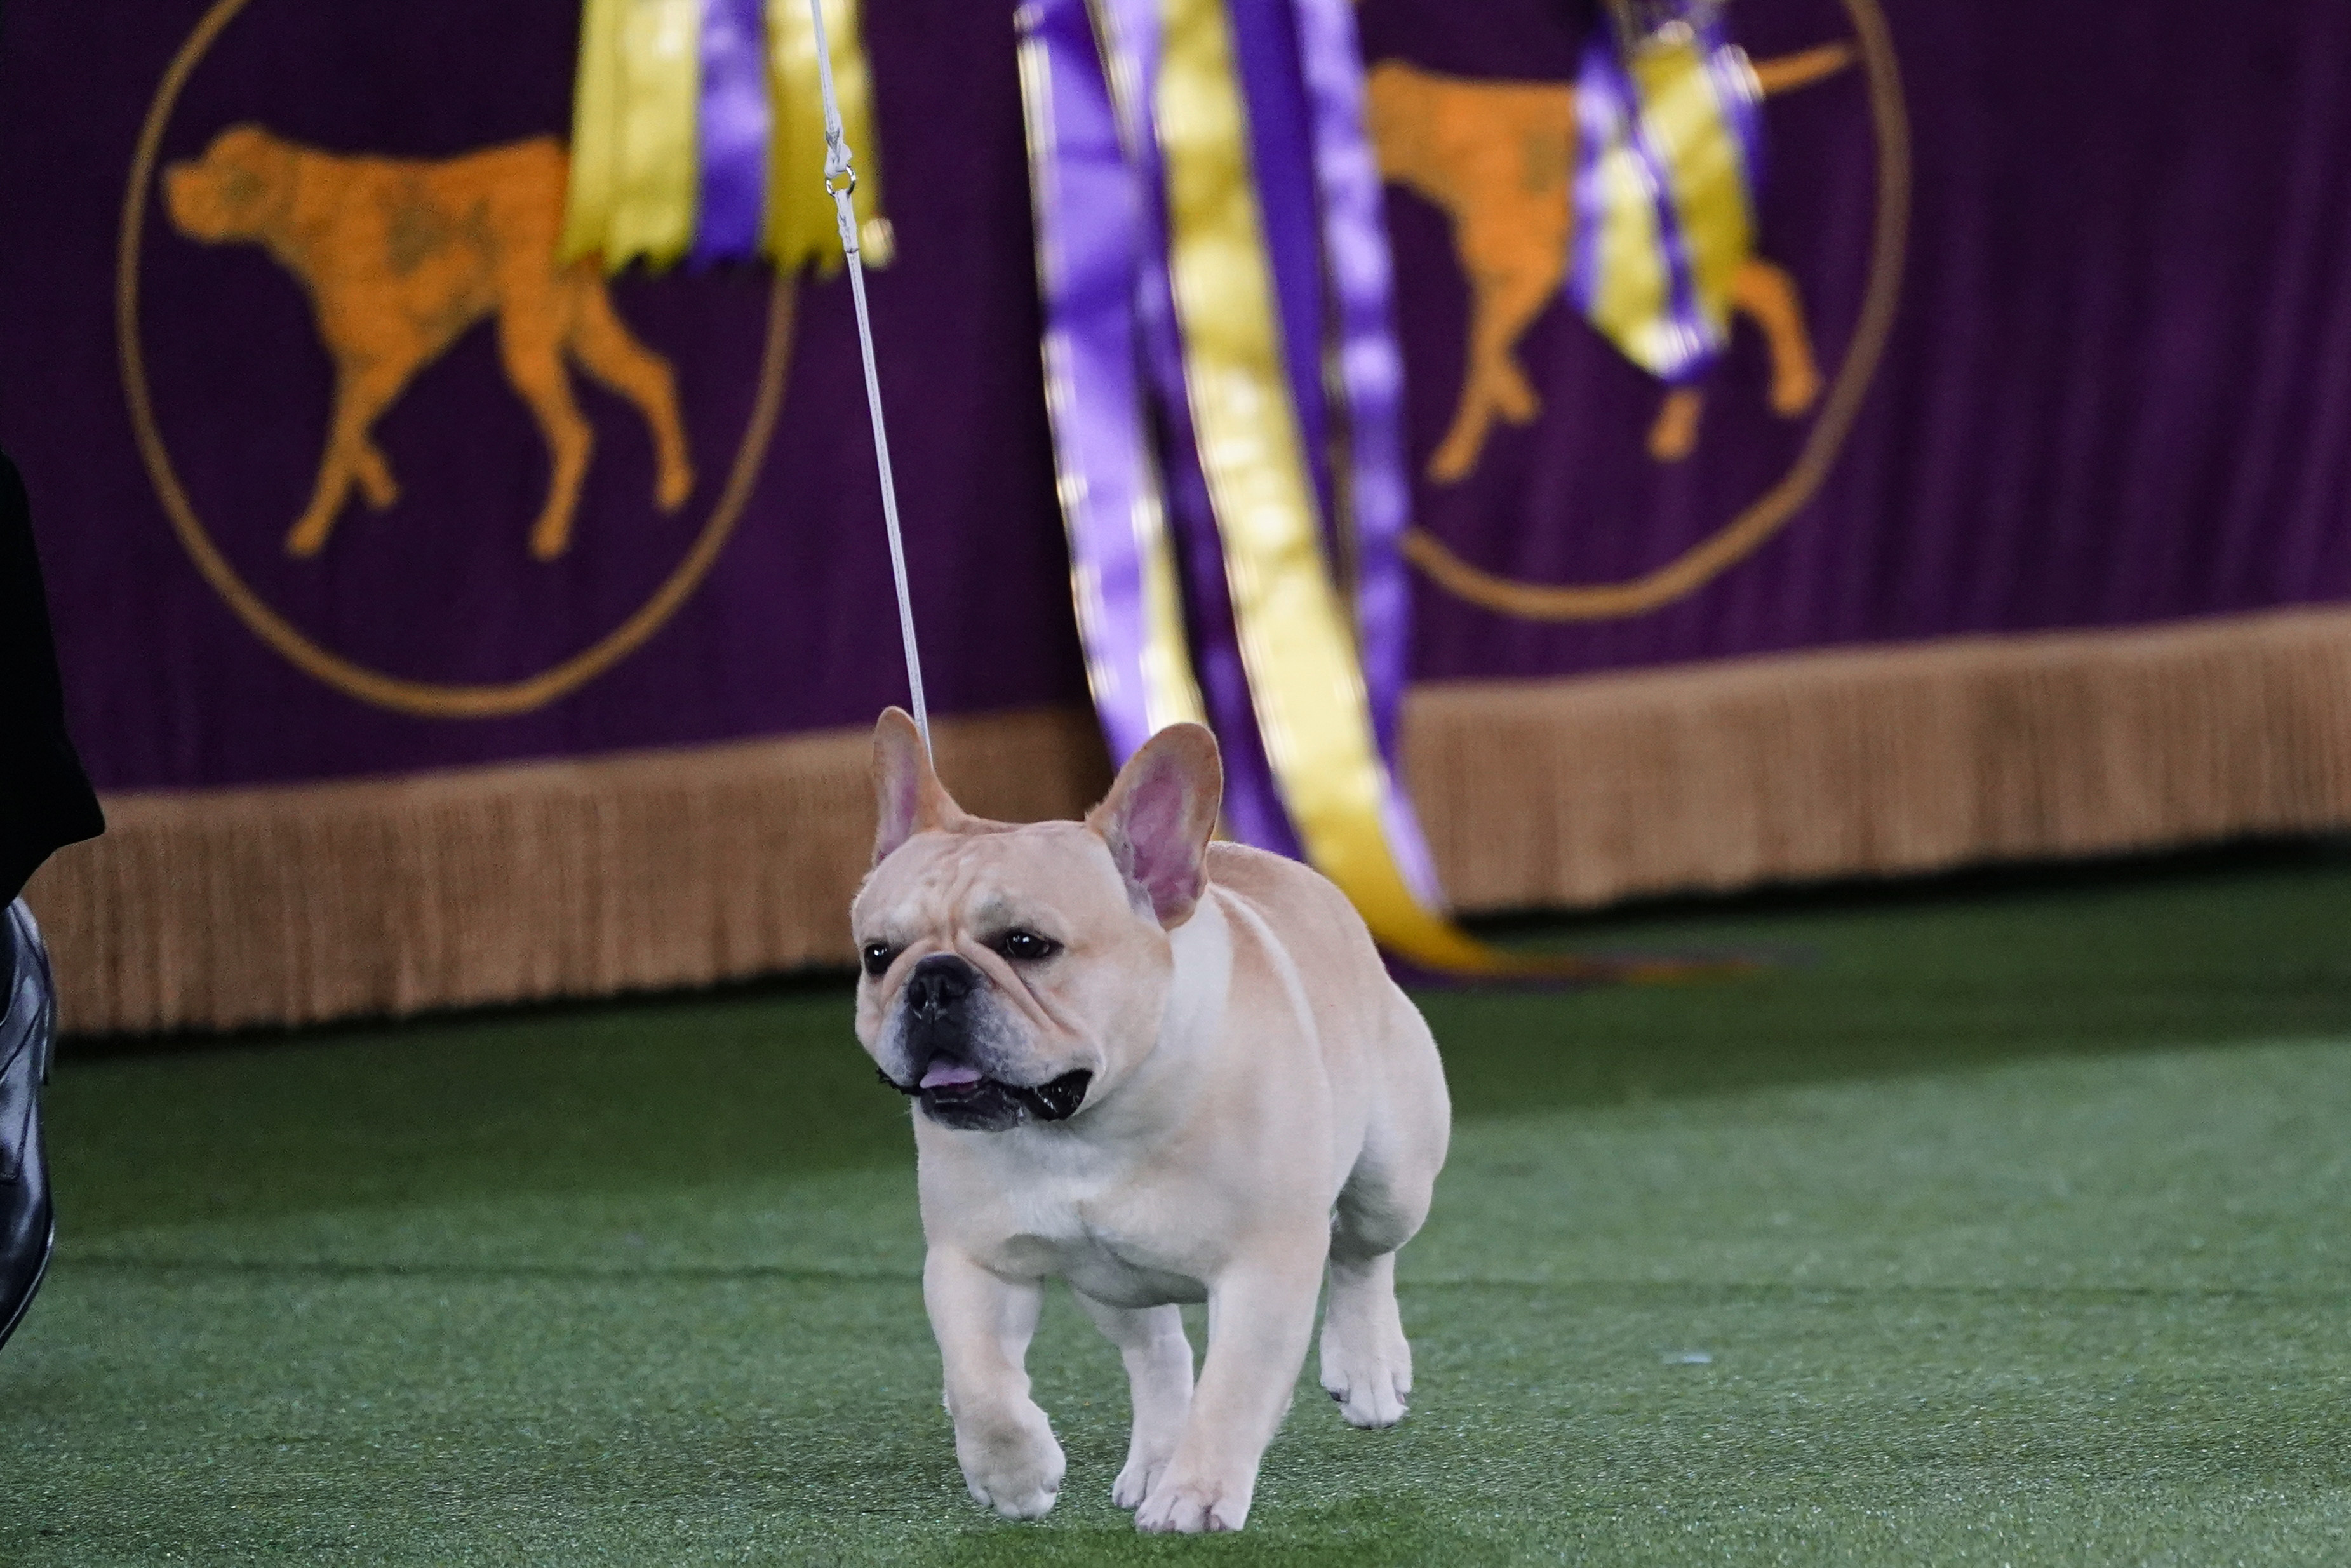 Westminster Dog Show categories in the current year